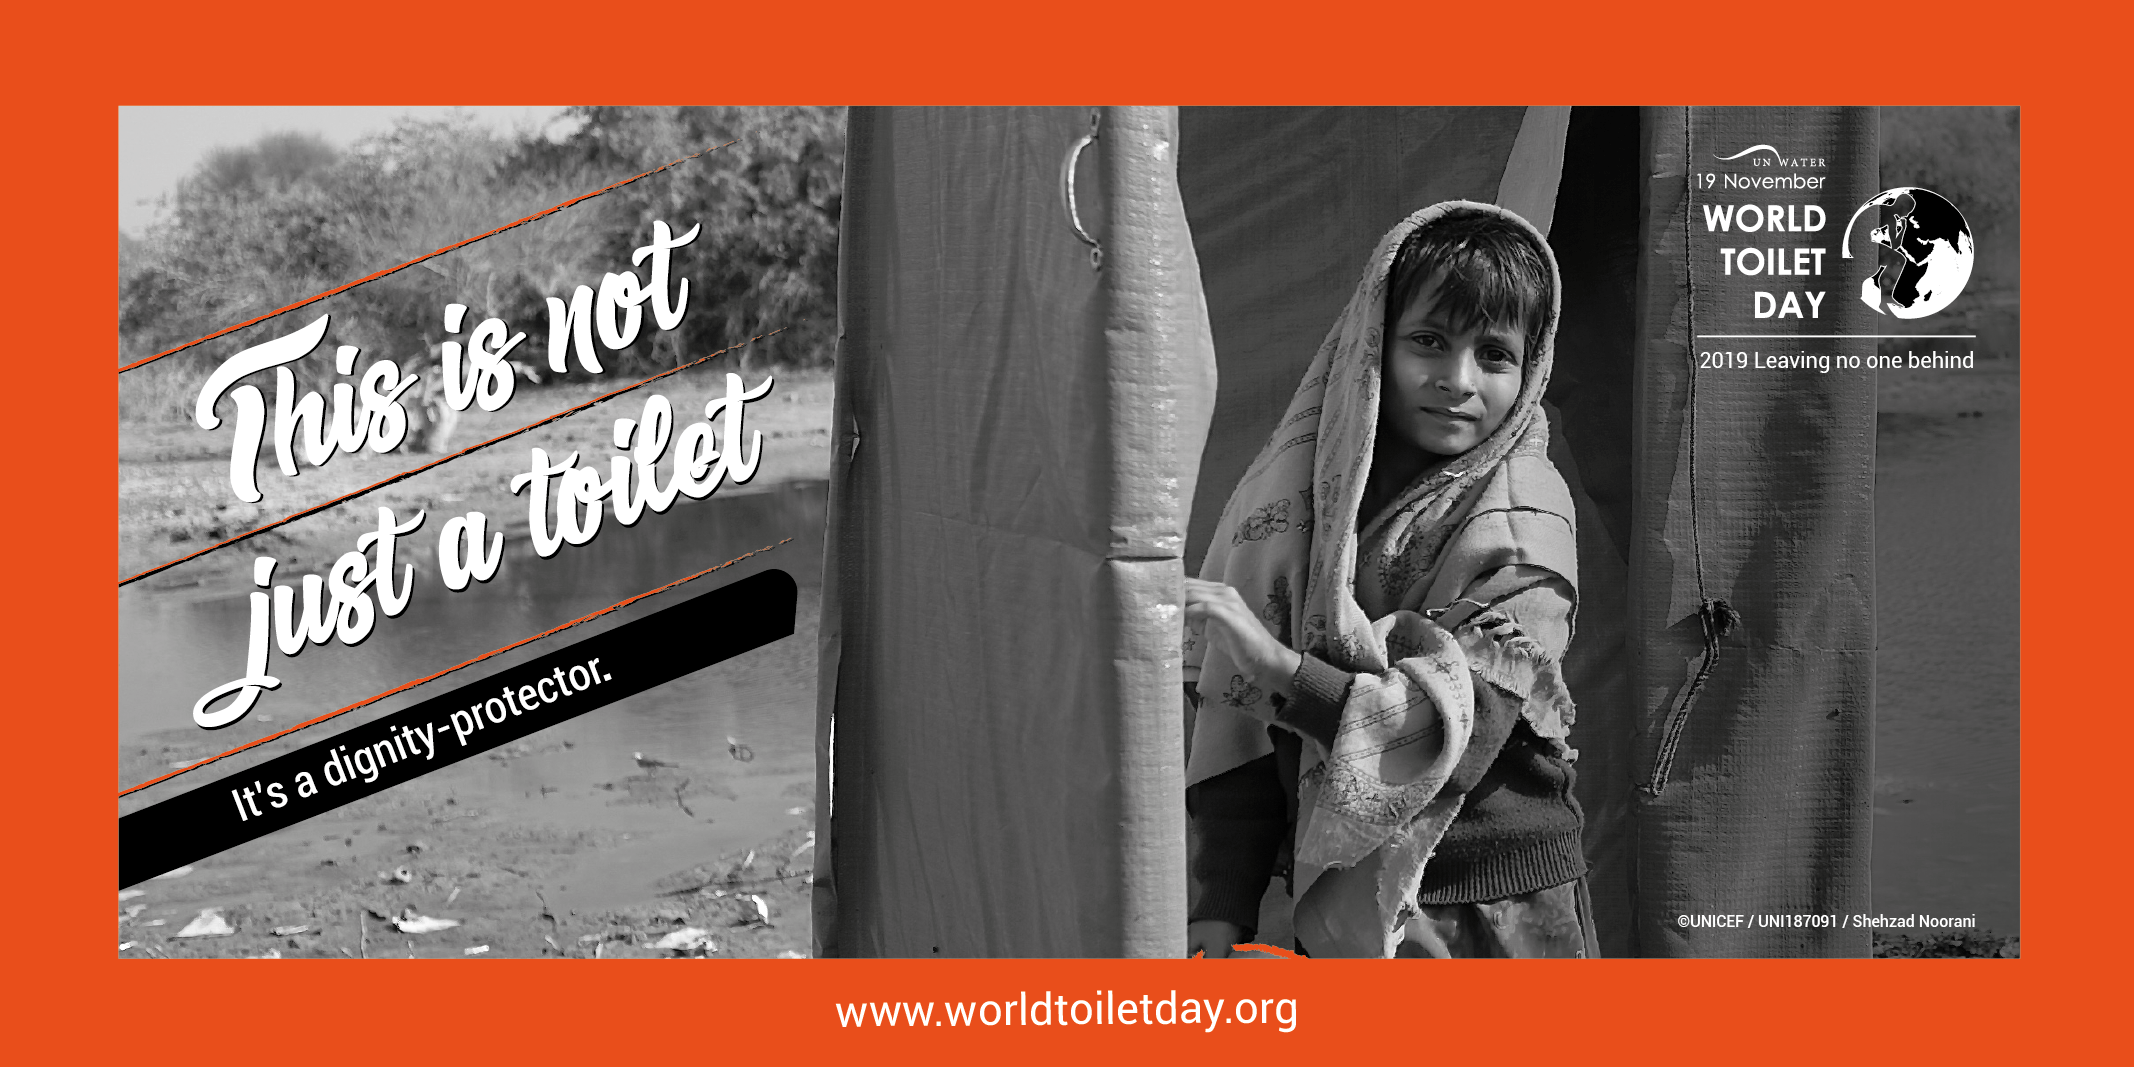 Small child with text for World Toilet Day 2019: &quot;This is not just a toilet. It&#039;s a dignity protector.&quot; Credit: www.worldtoiletday.org